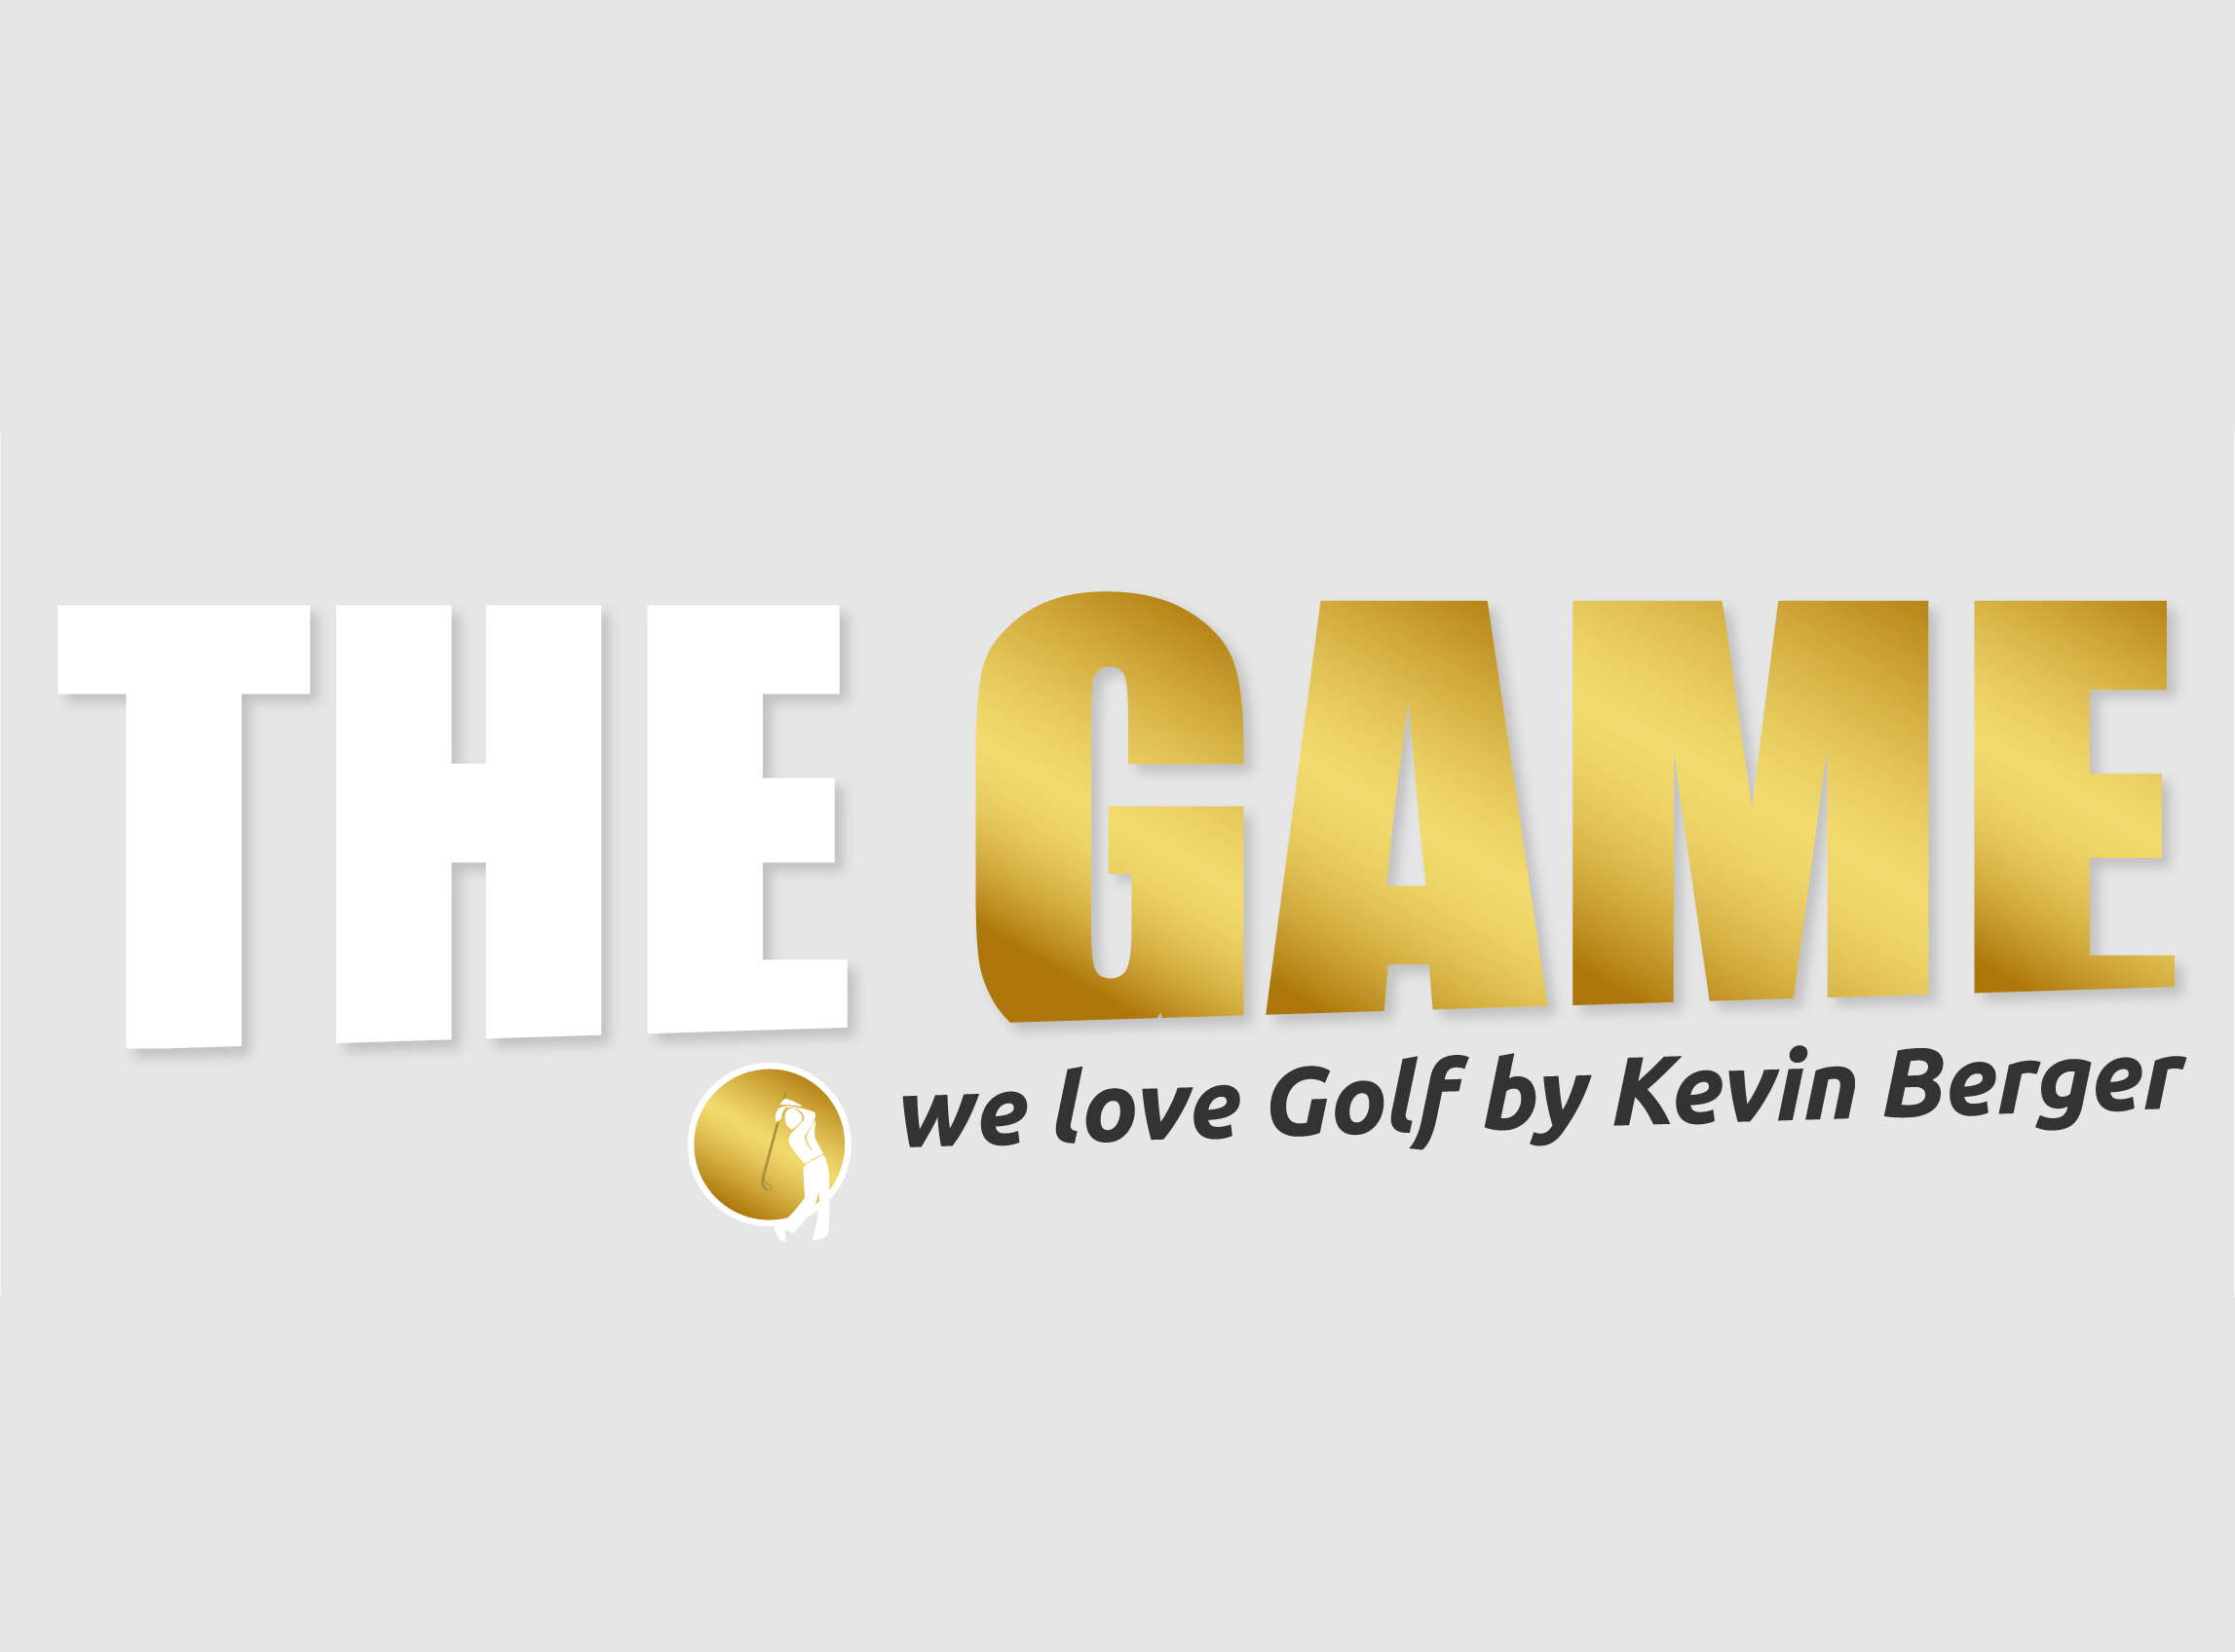 THE GAME – PRO AM – We love Golf by Kevin Berger Sponsor